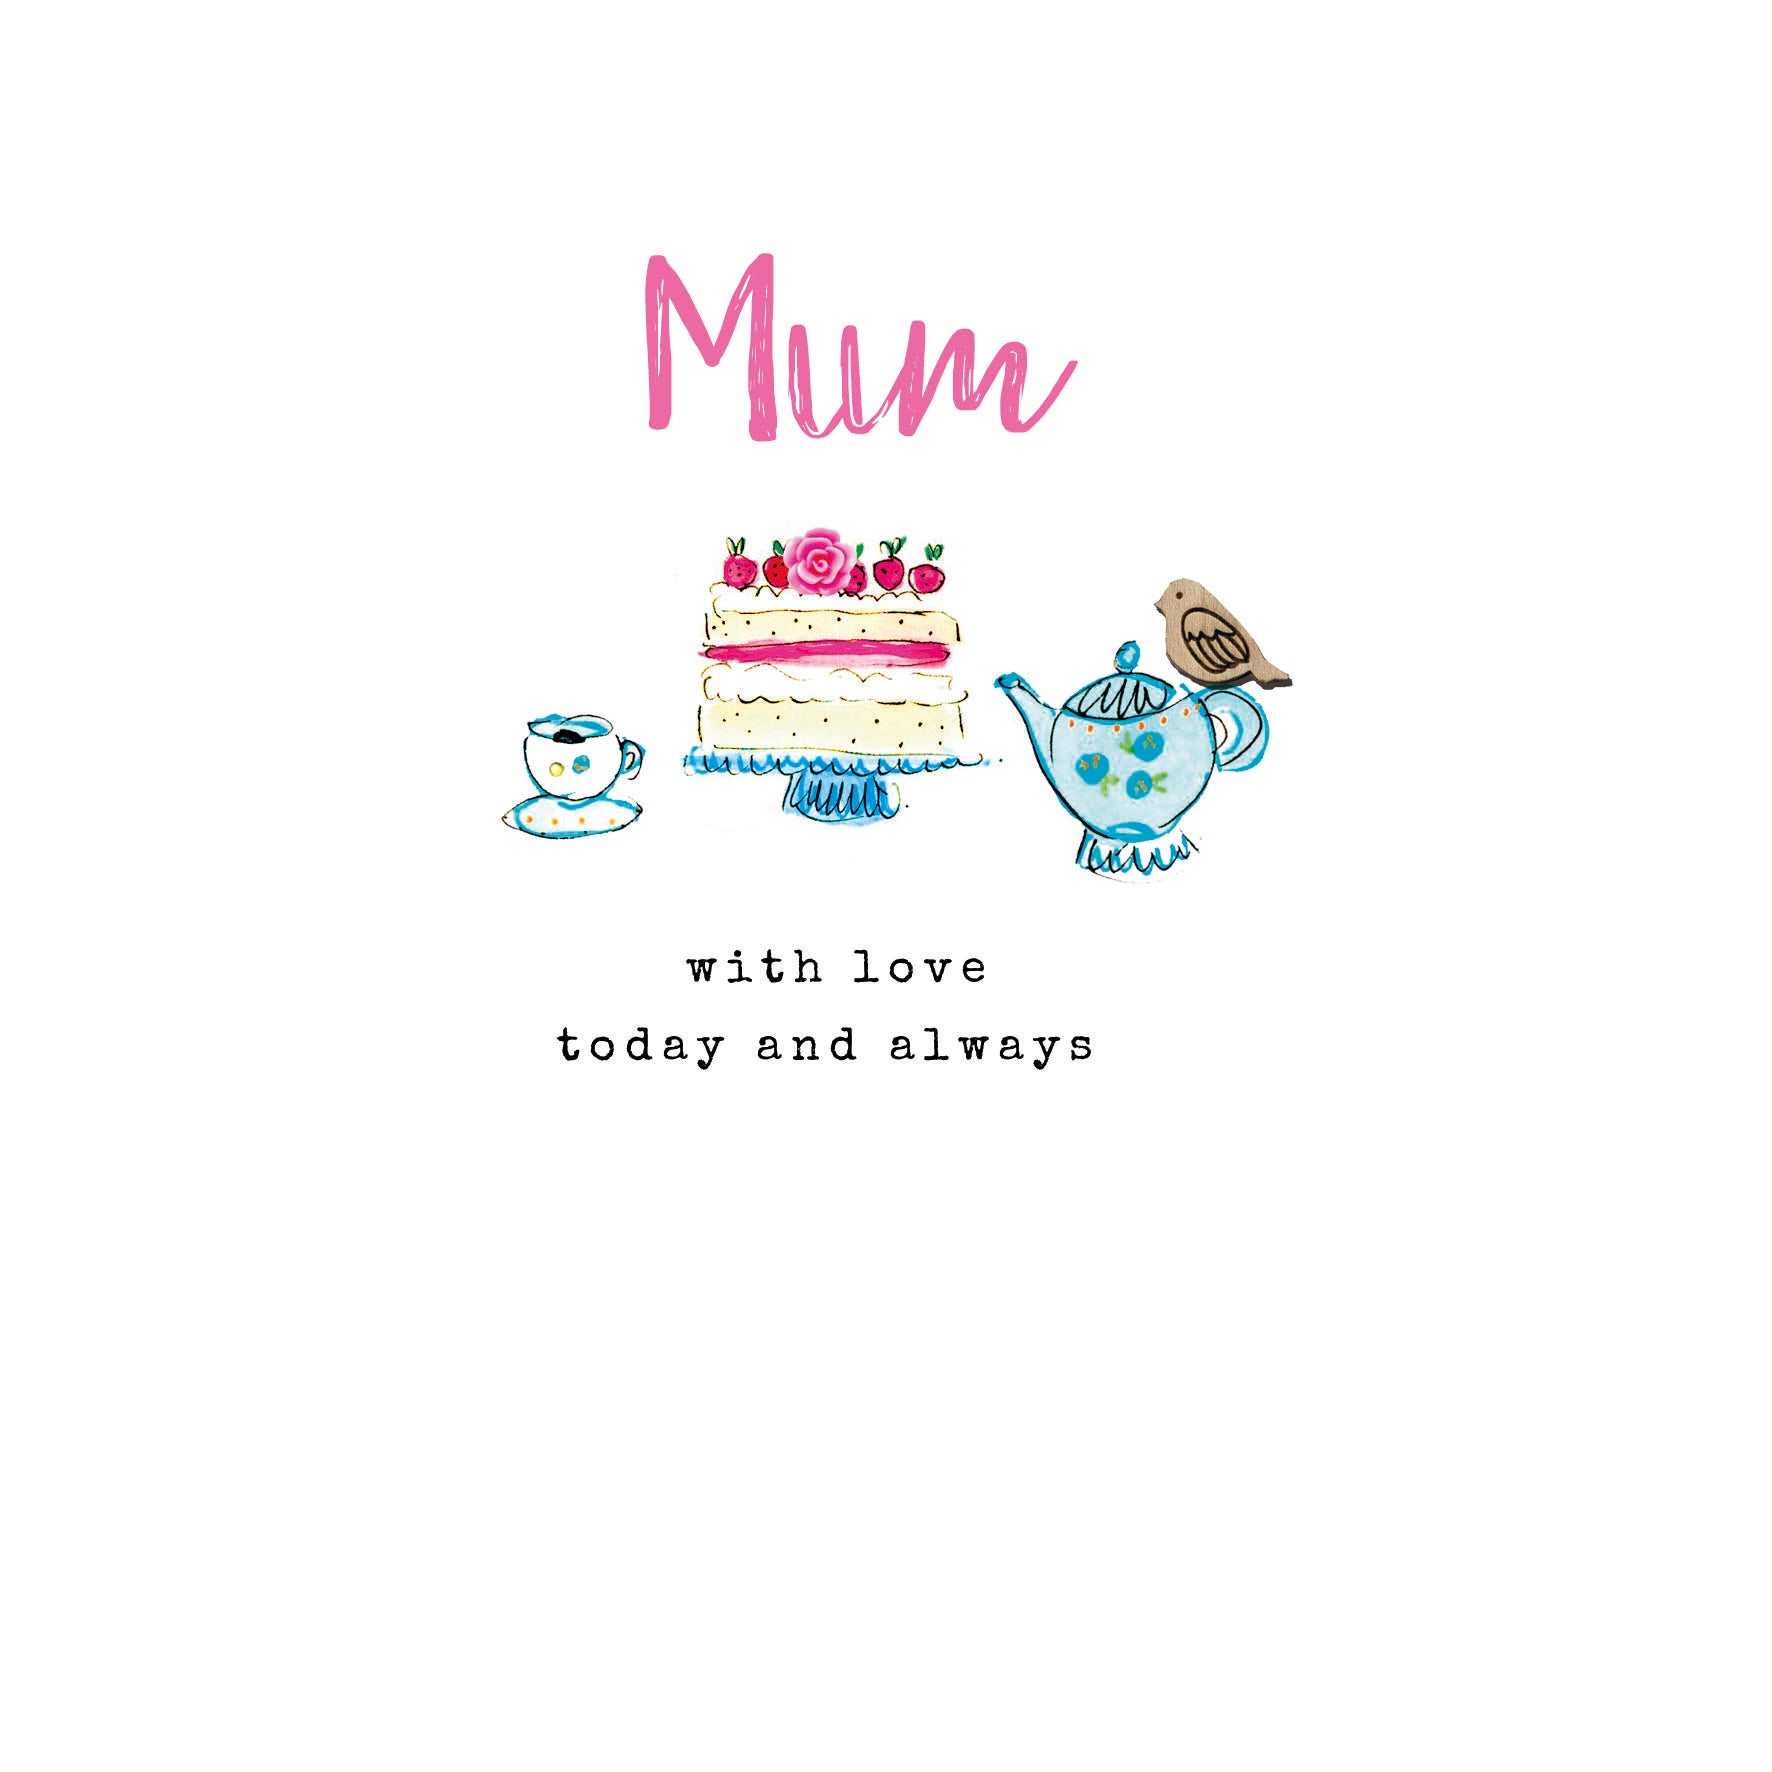 Mum Wooden Bird Embellished Card from Penny Black